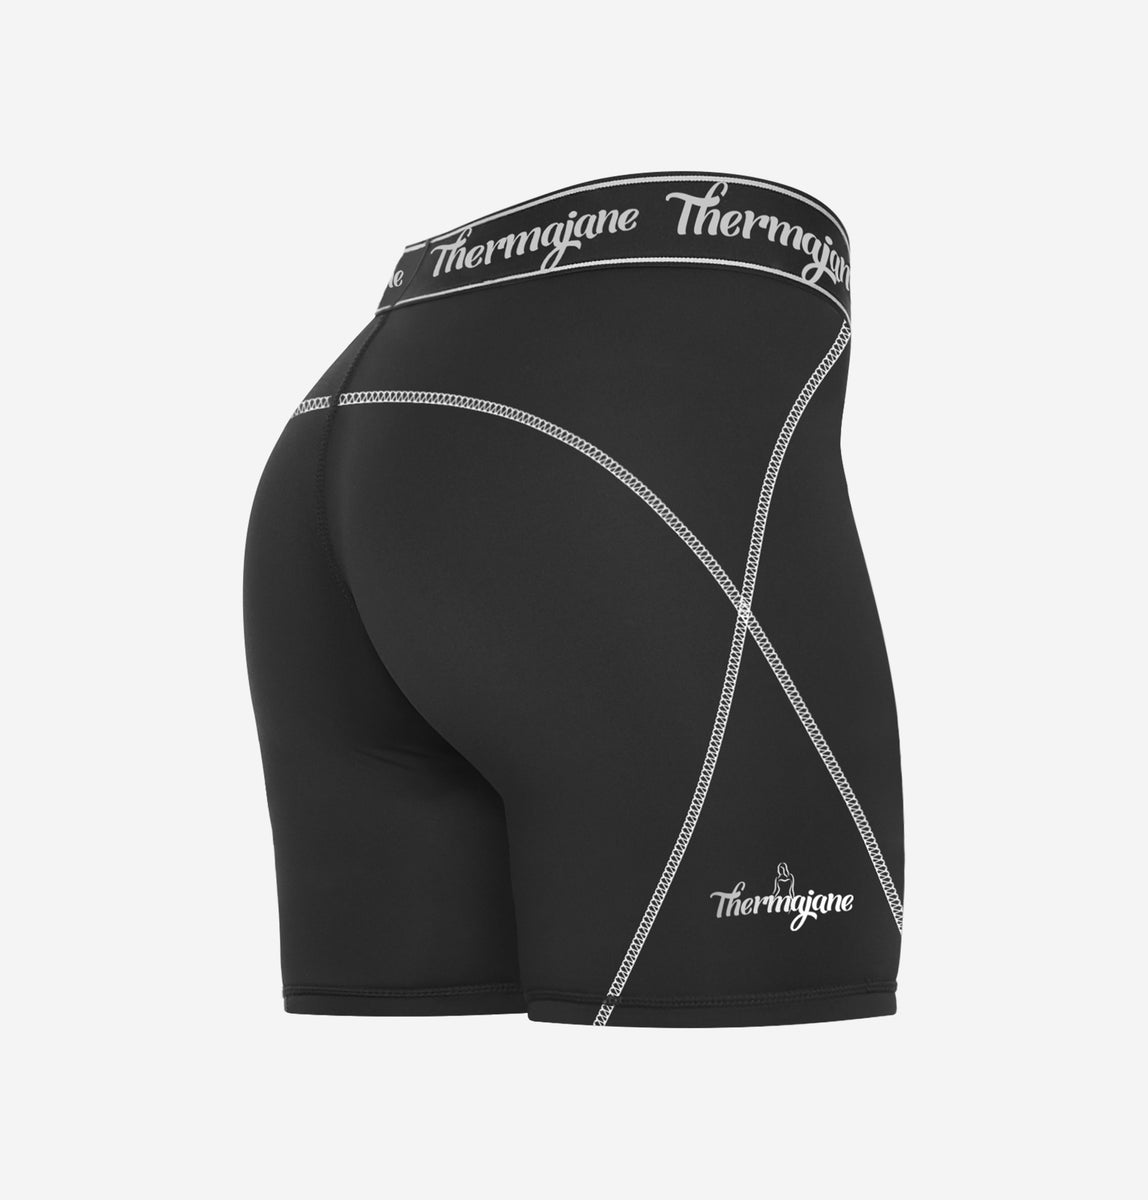 Thermajane Introduces New Line of Compression Wear for Women